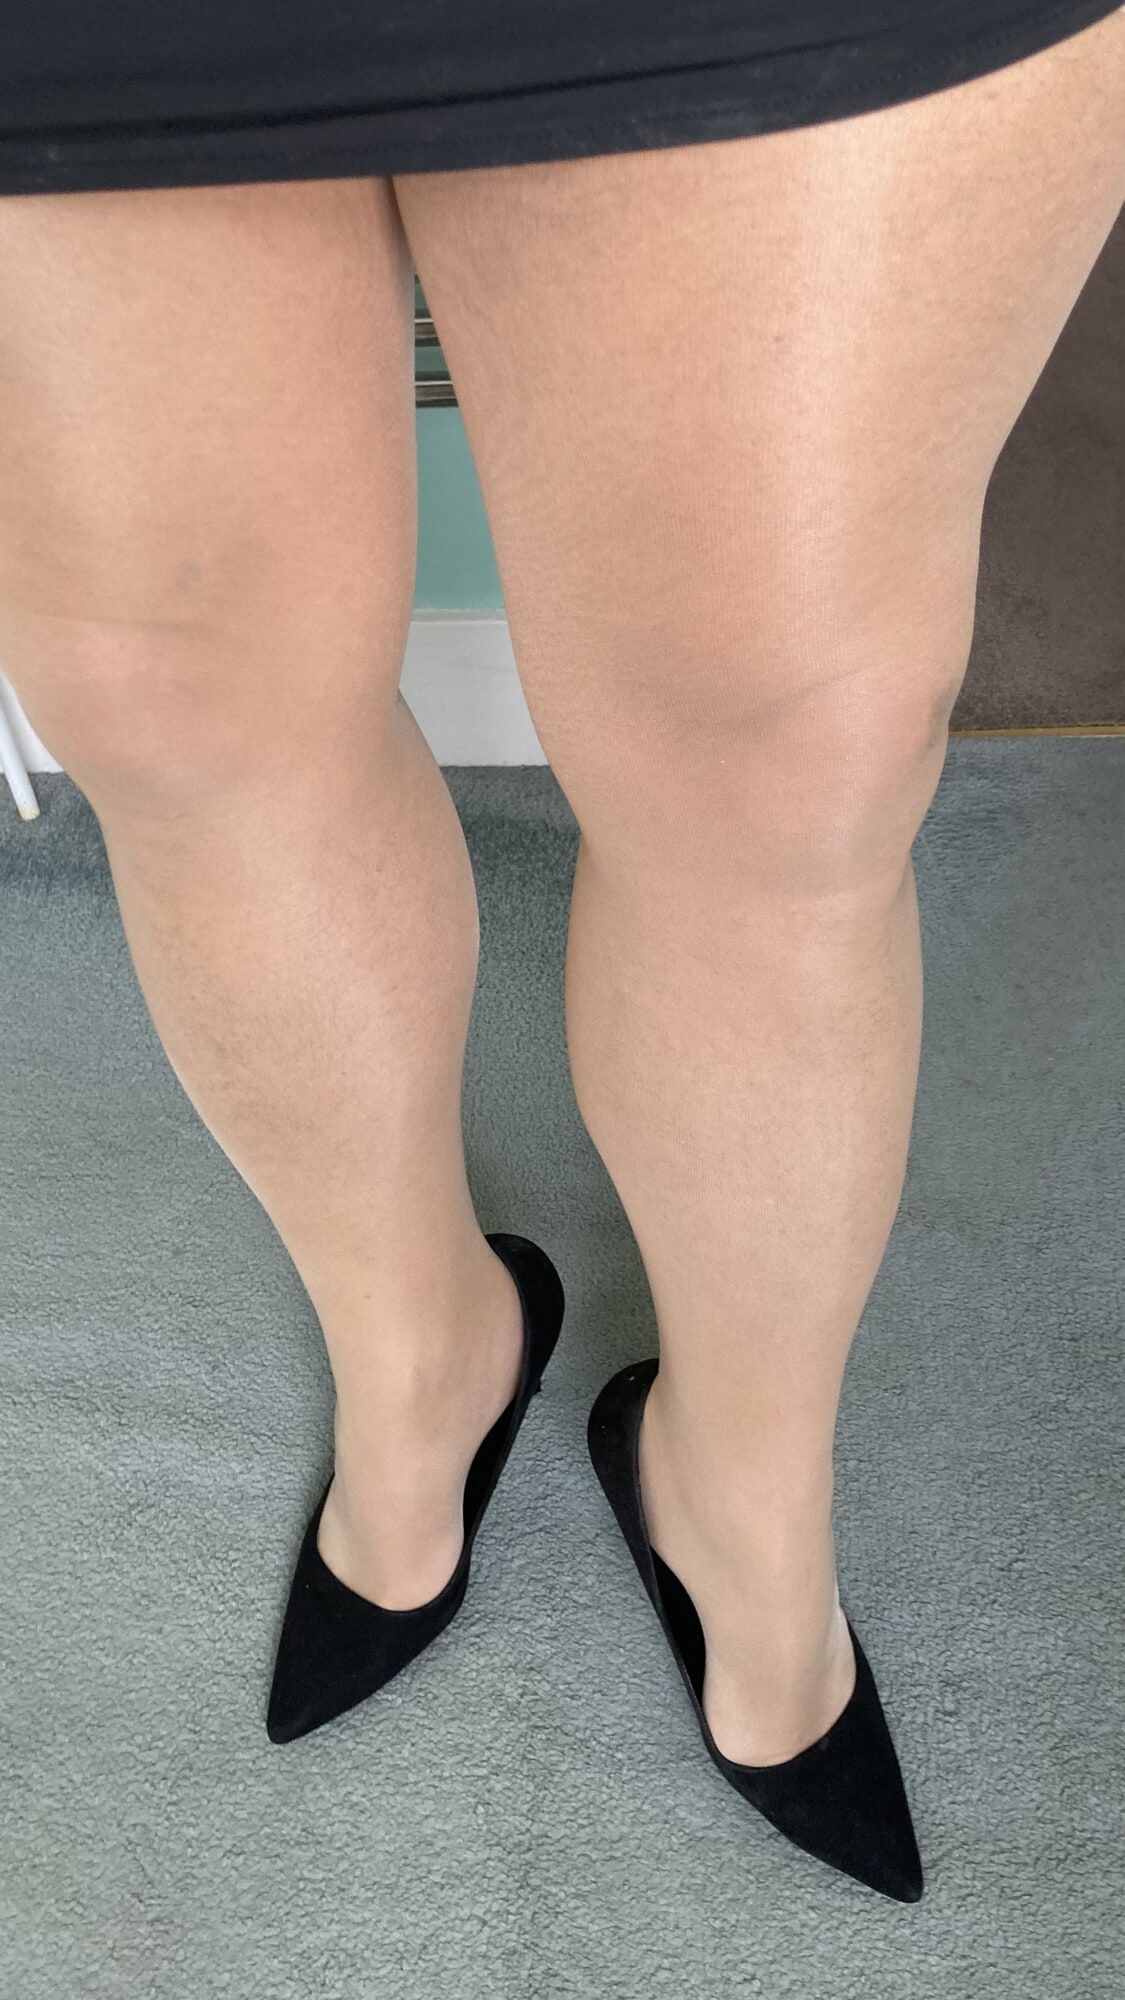 My legs in shiny glossy tights and sexy high heels #6